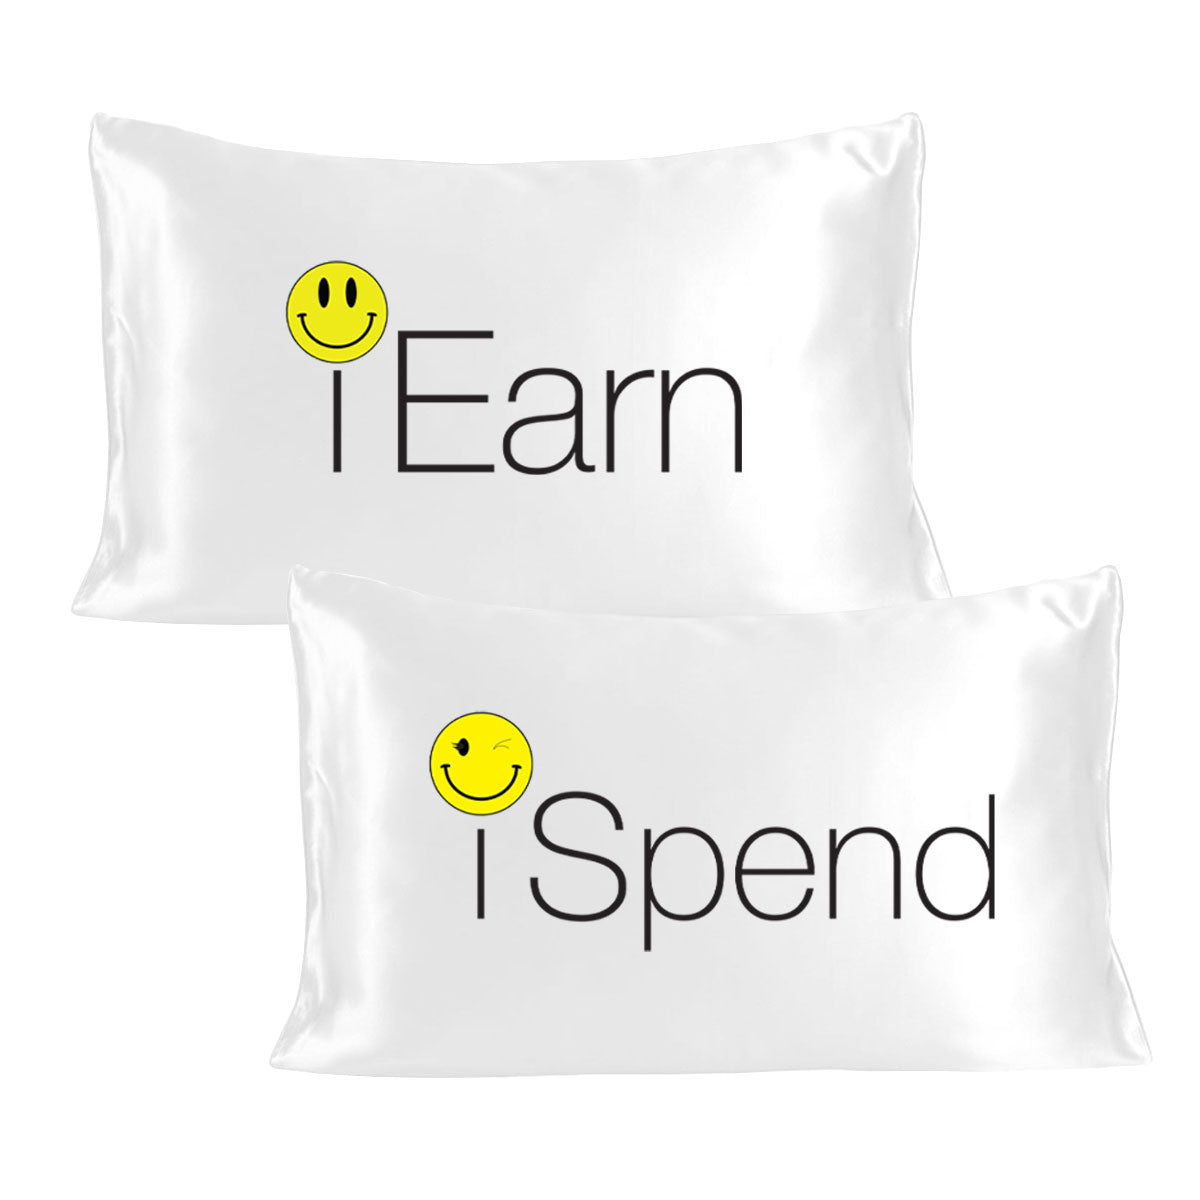 White Satin Silky Pillow Covers Set, Luxury Soft, Smooth Feel with Love Messages from "I Earn I Spend" Stoa Paris Pillow Tok Collection